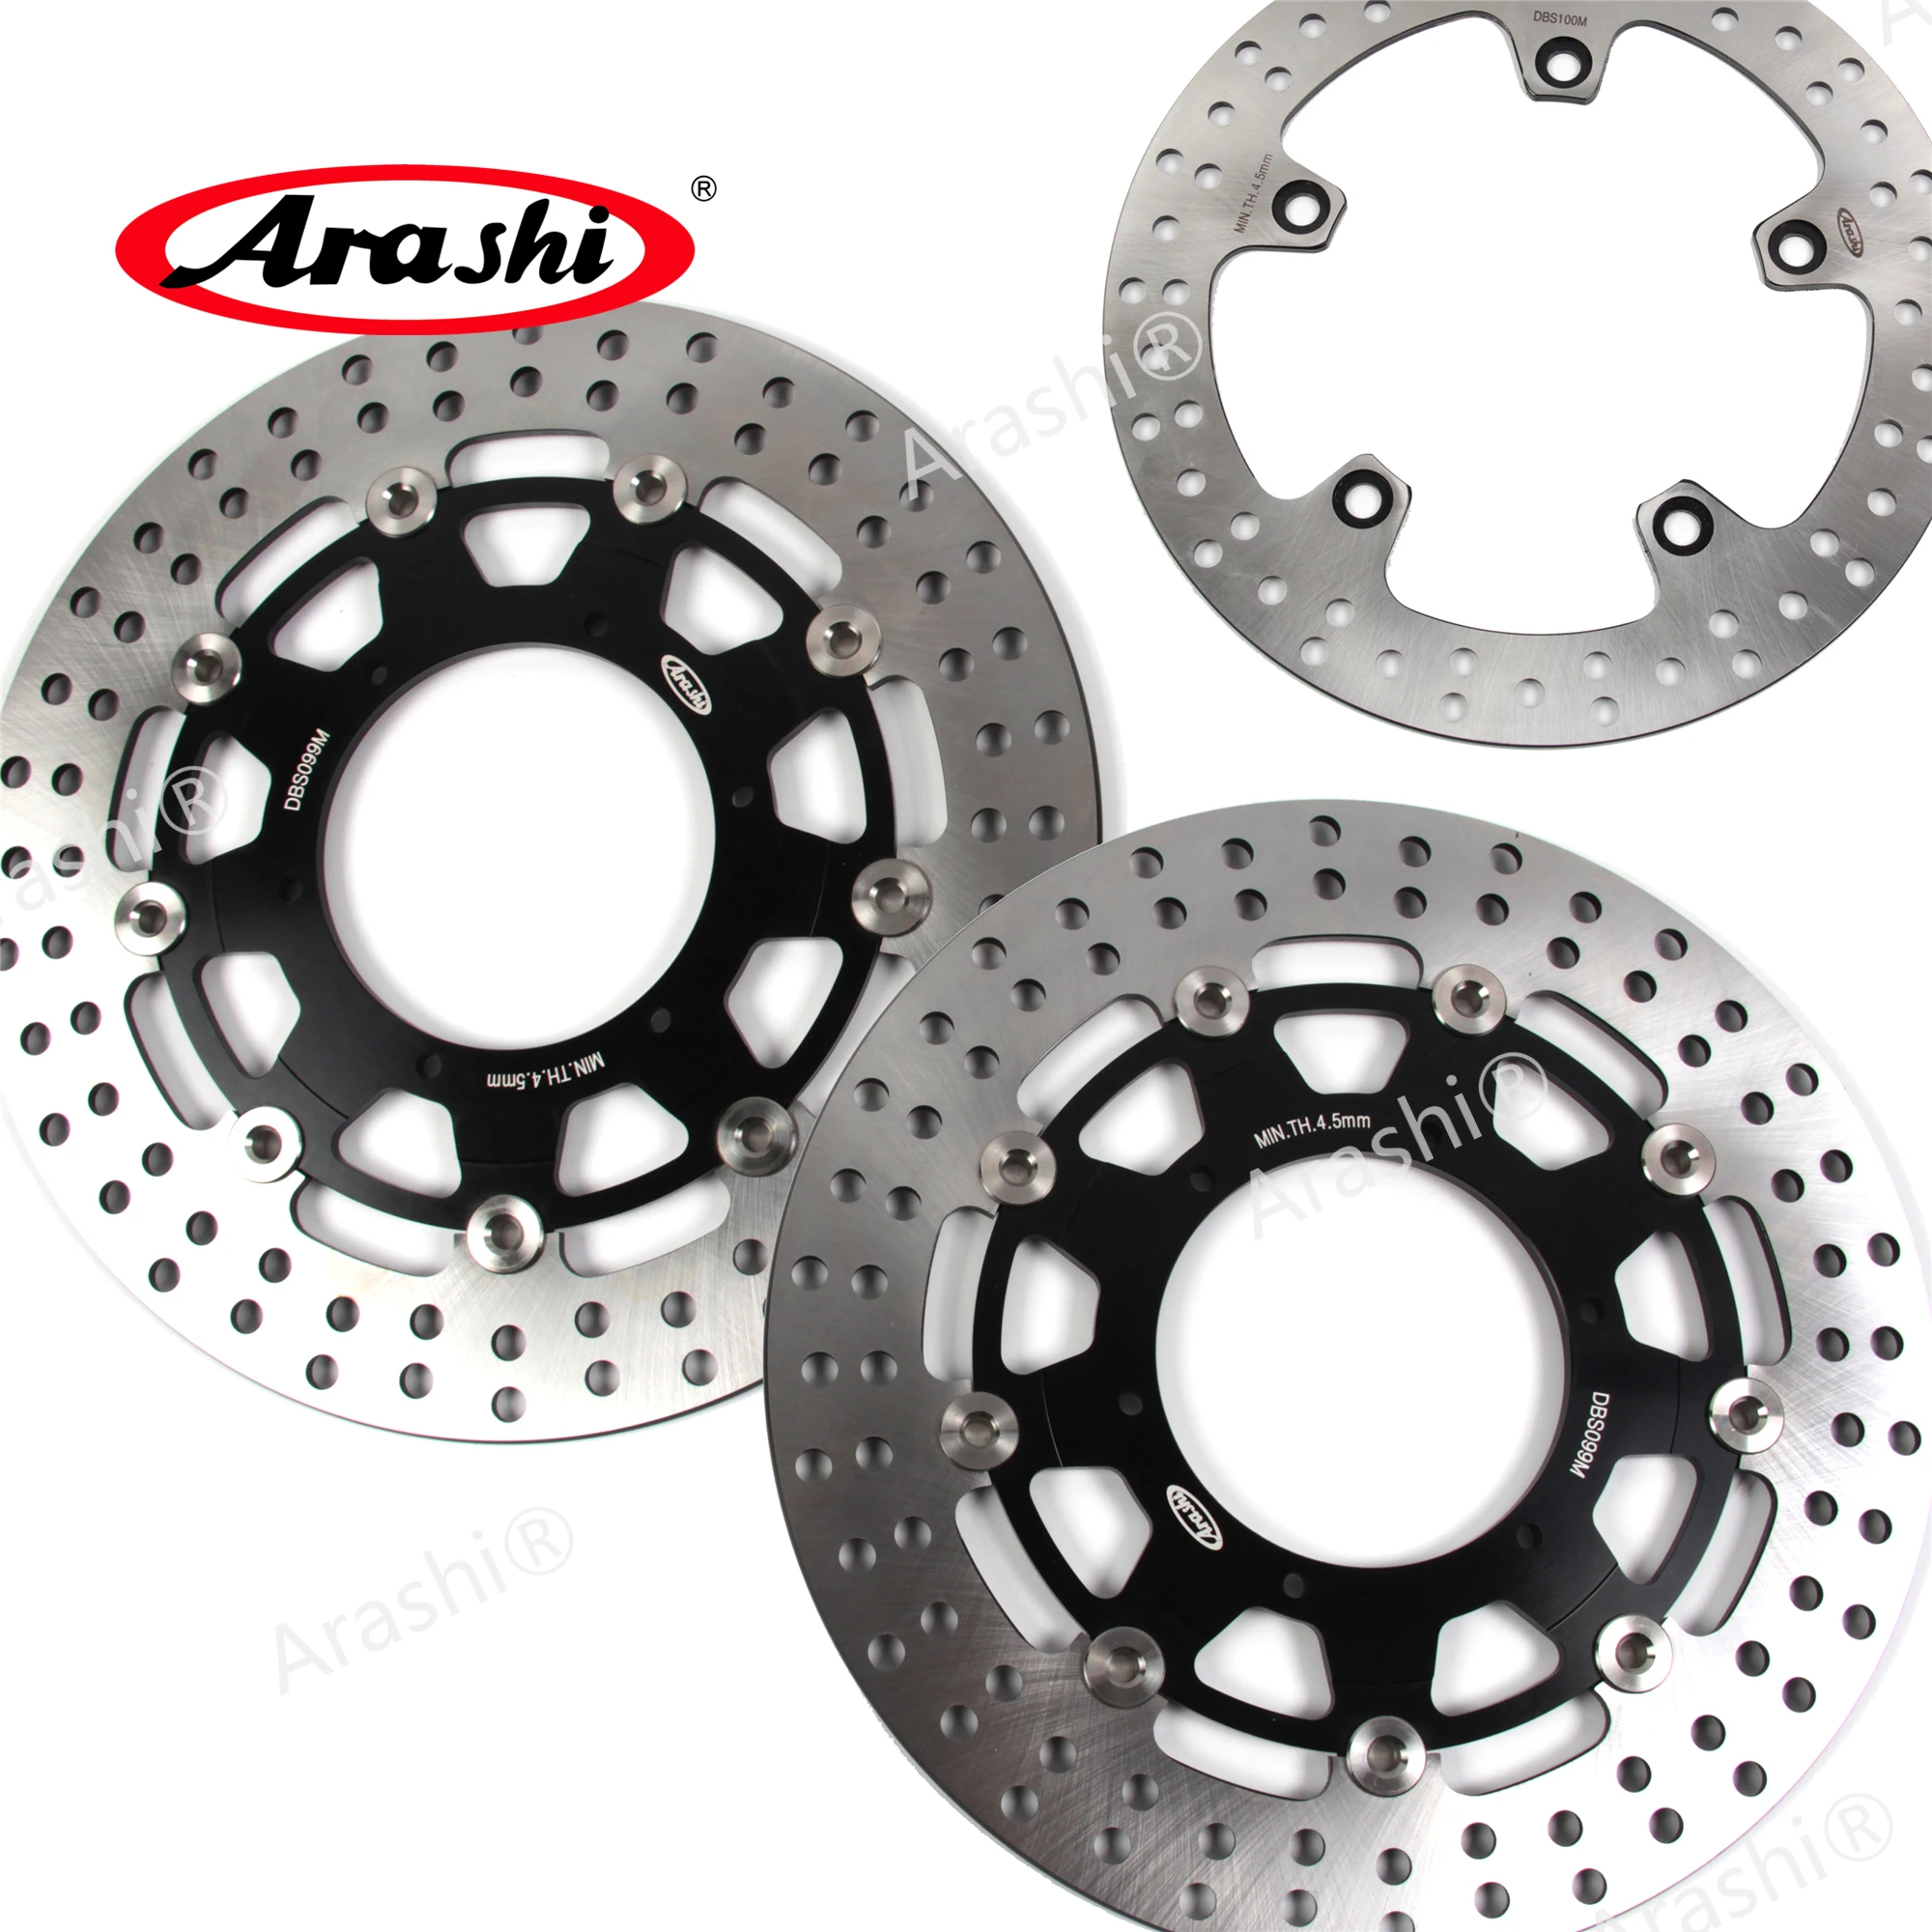 Arashi Front Rear Brake Disc Rotors for Bmw F800GS 2009-2015 ADVENTURE ABS 2013-2018 Motorcycle Replacement Accessories F 800 GS GS800 GS 800 Gold 2010 2011 2012 2014 2016 2017 